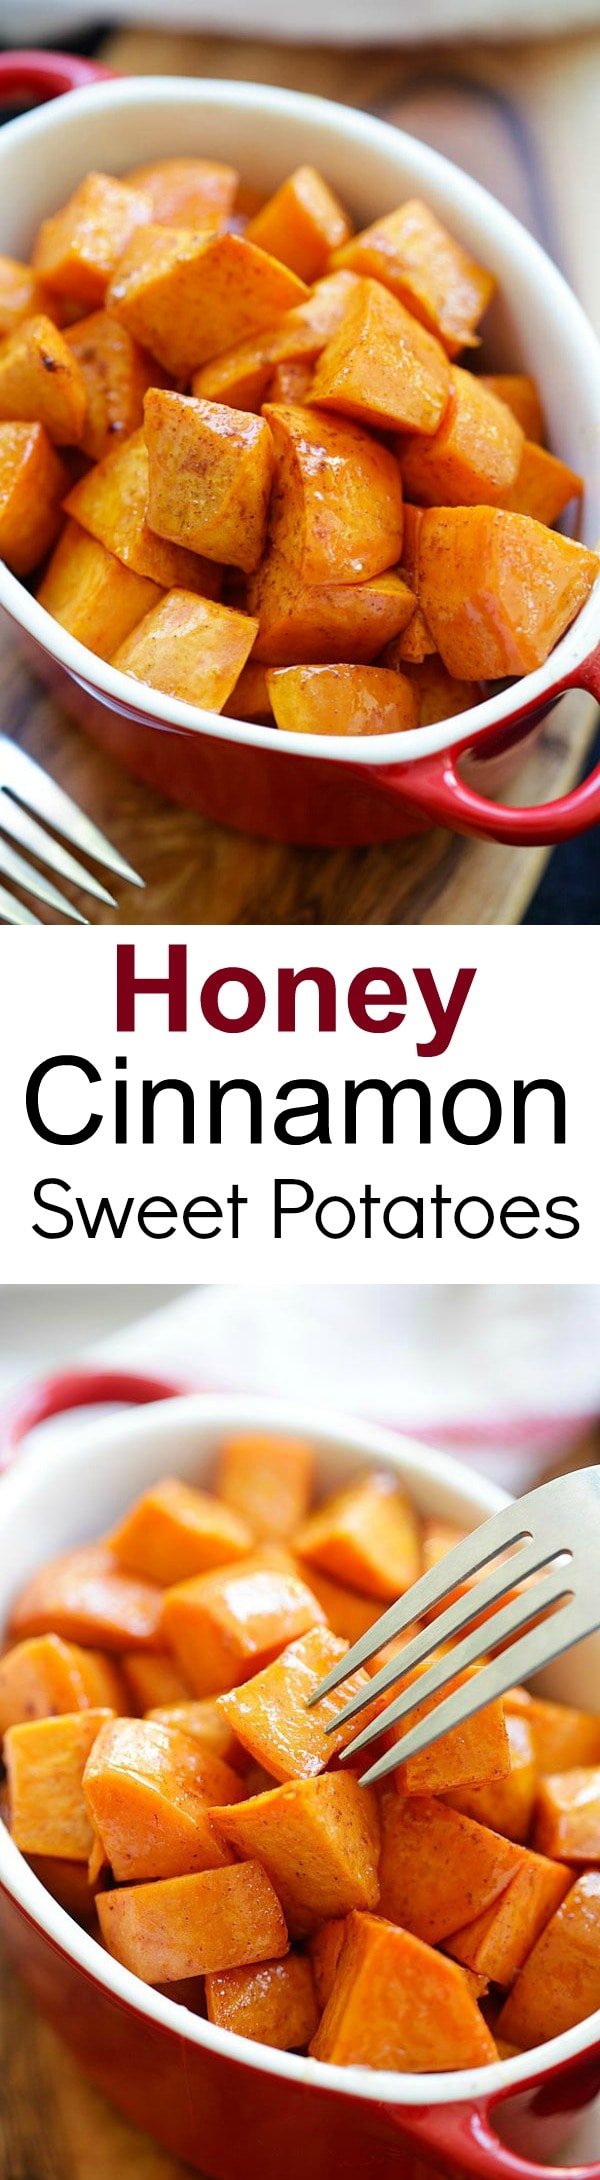 Honey Cinnamon Roasted Sweet Potatoes - the best fall and Thanksgiving side dish that everyone can't stop eating. Easy peasy and fool-proof | rasamalaysia.com